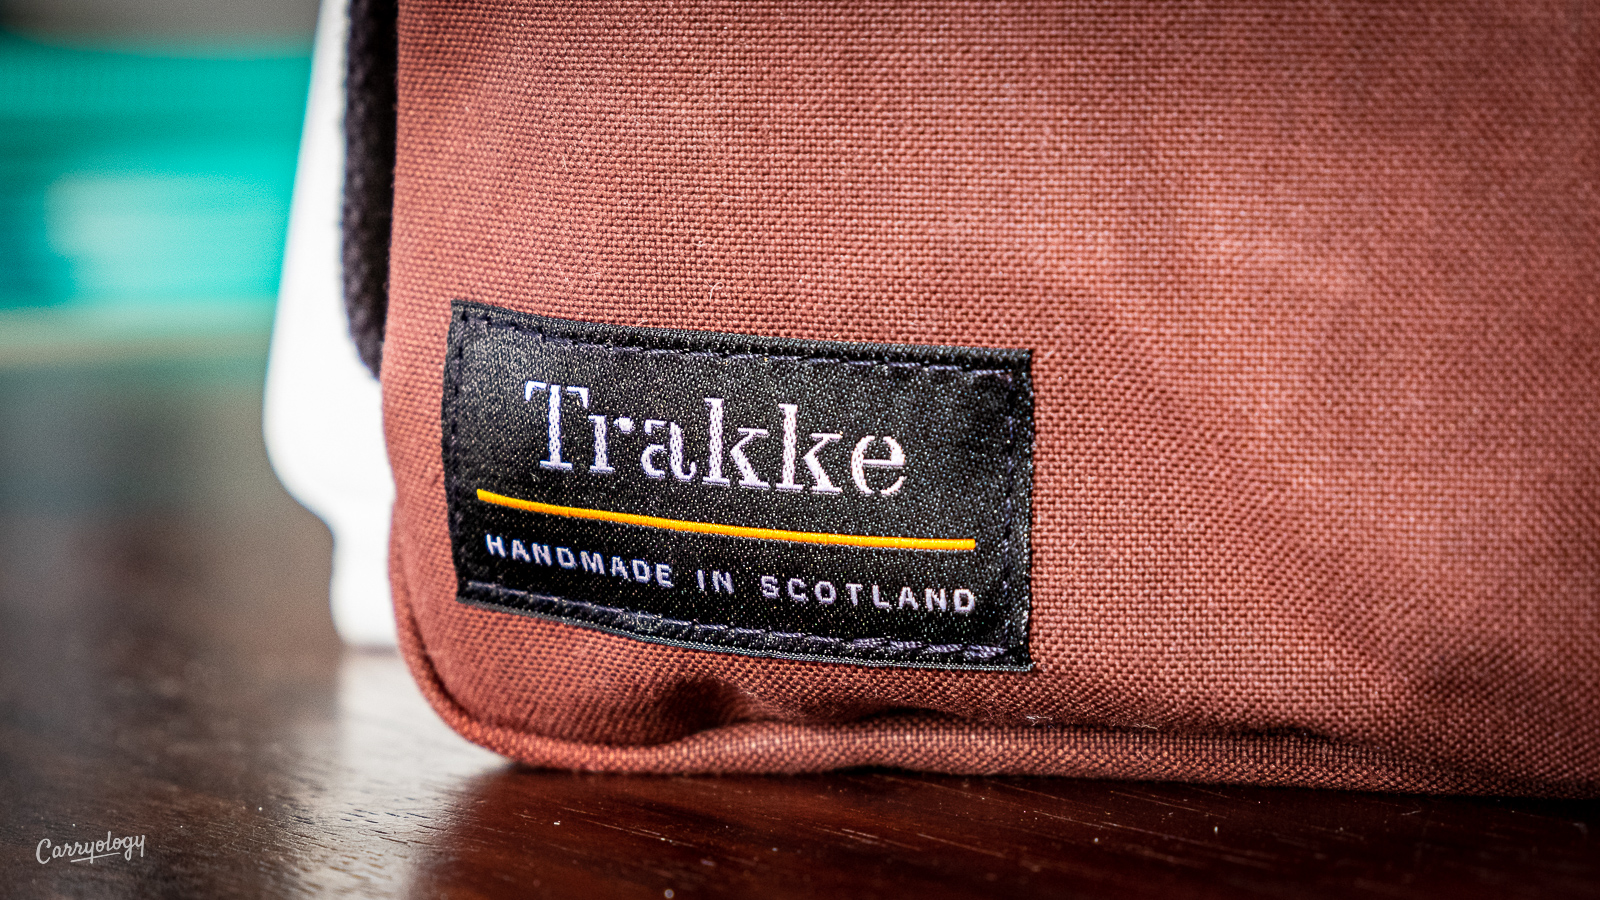 Trakke Adds Port Colorway to Their Waxed Canvas Range